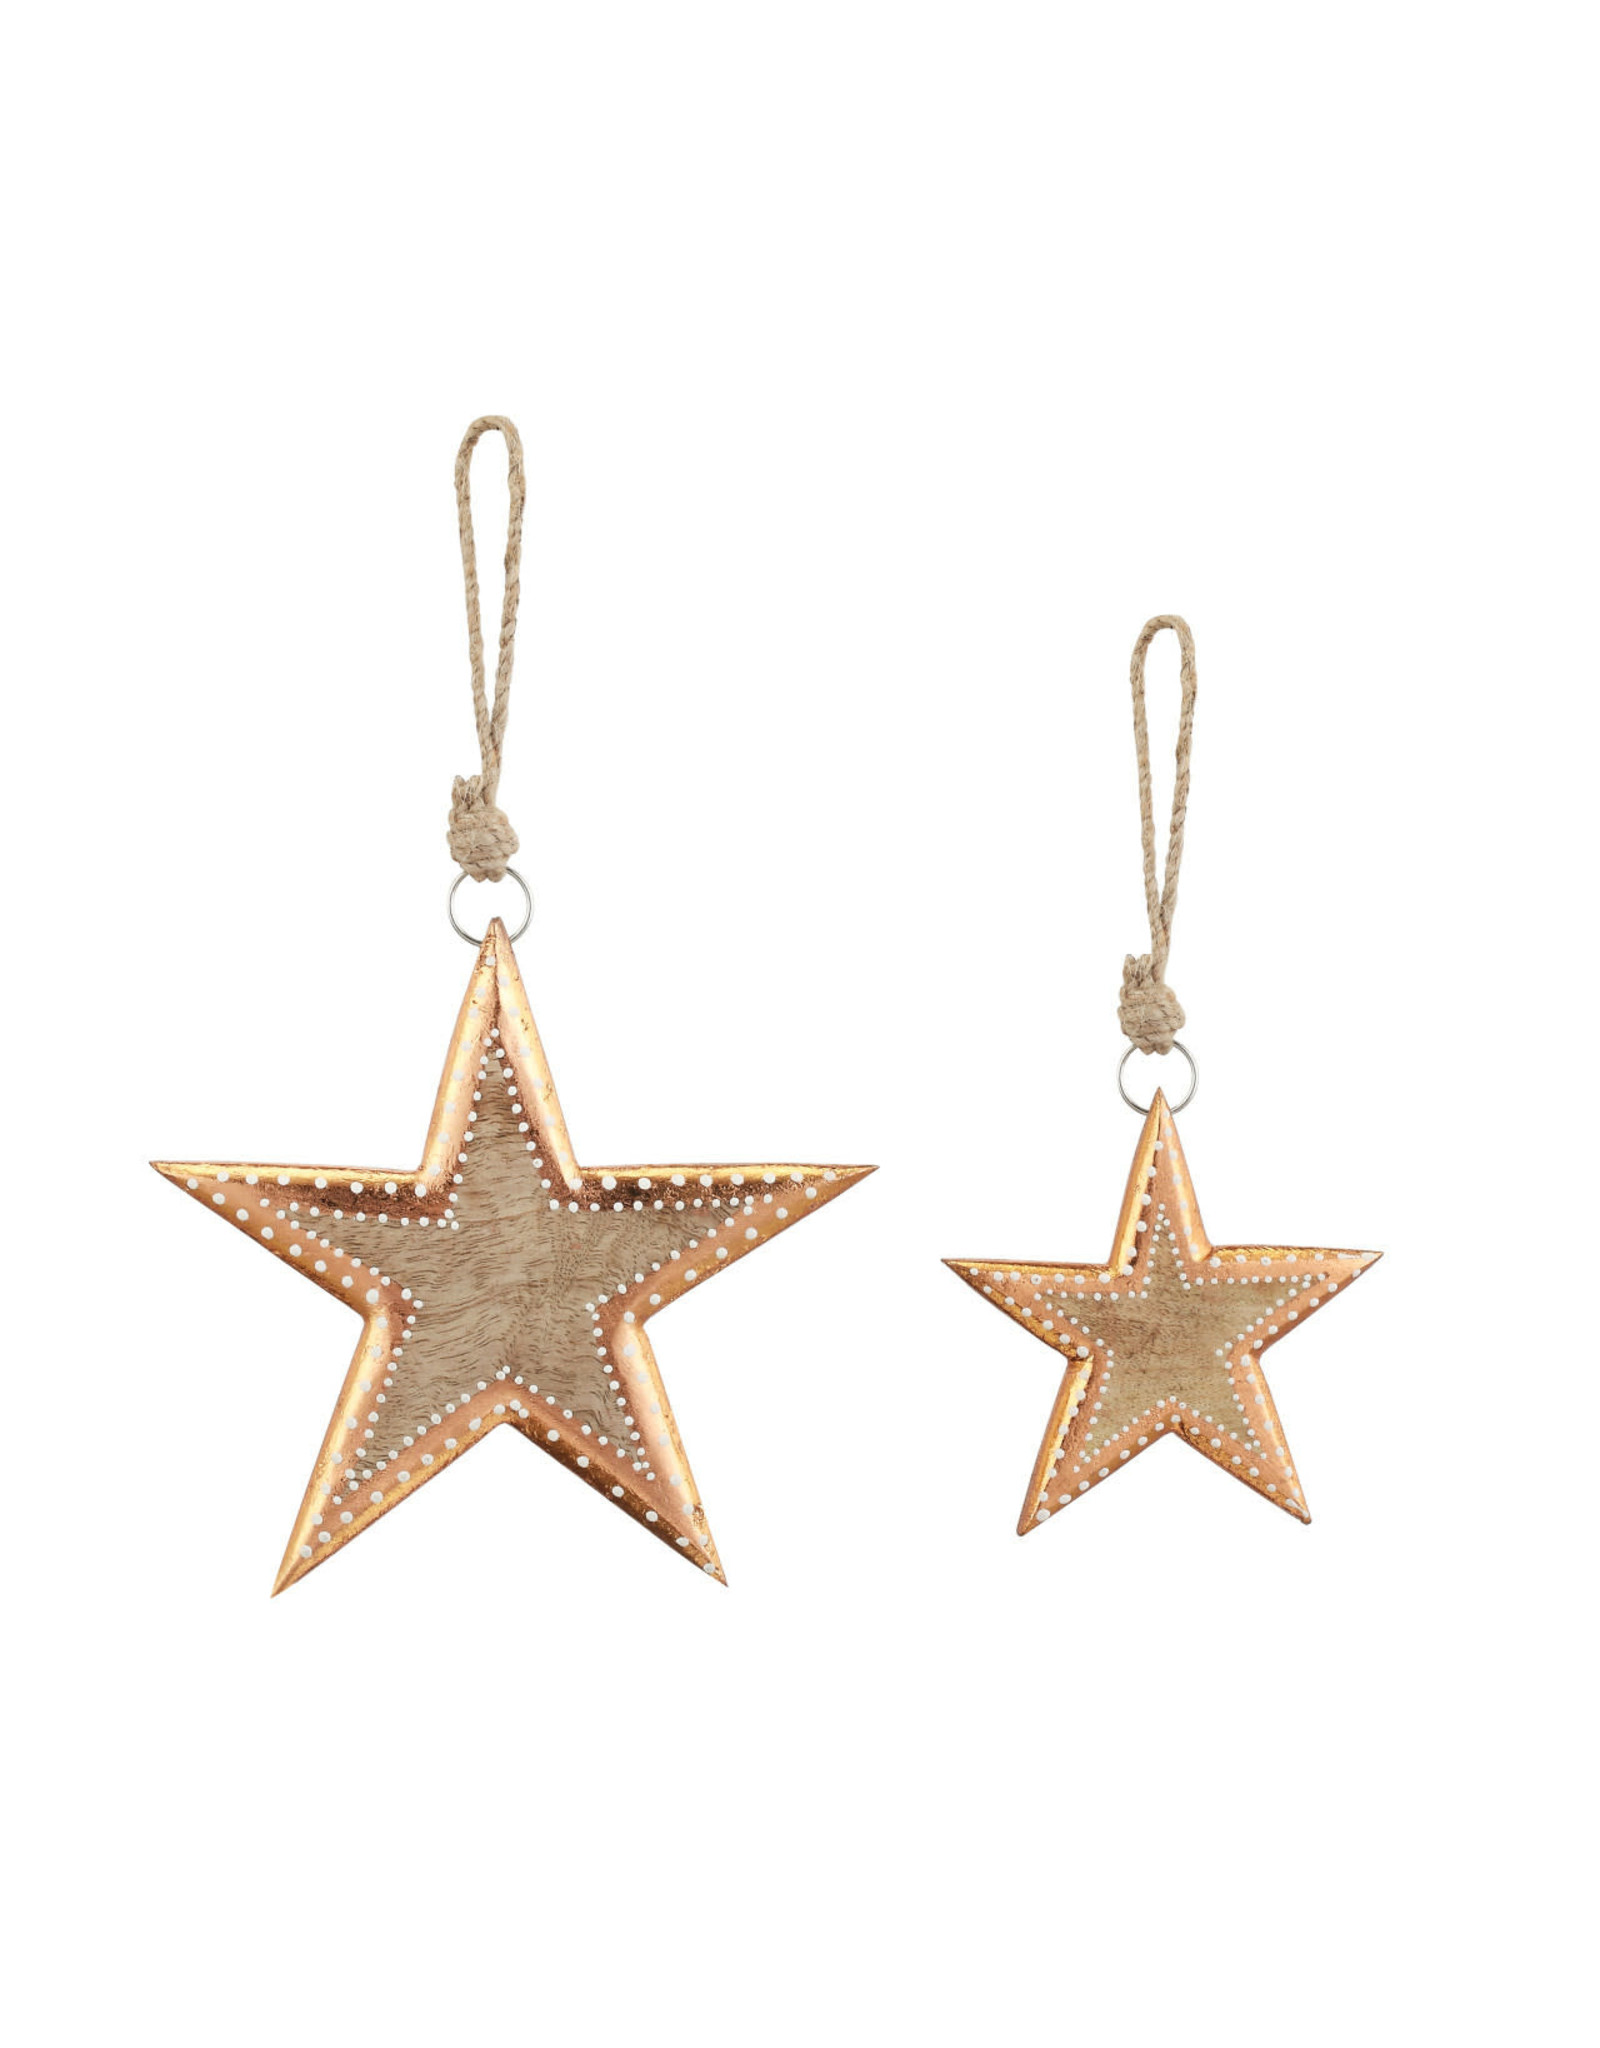 Ornaments - Wood Star with Copper Finish (Set of 2)